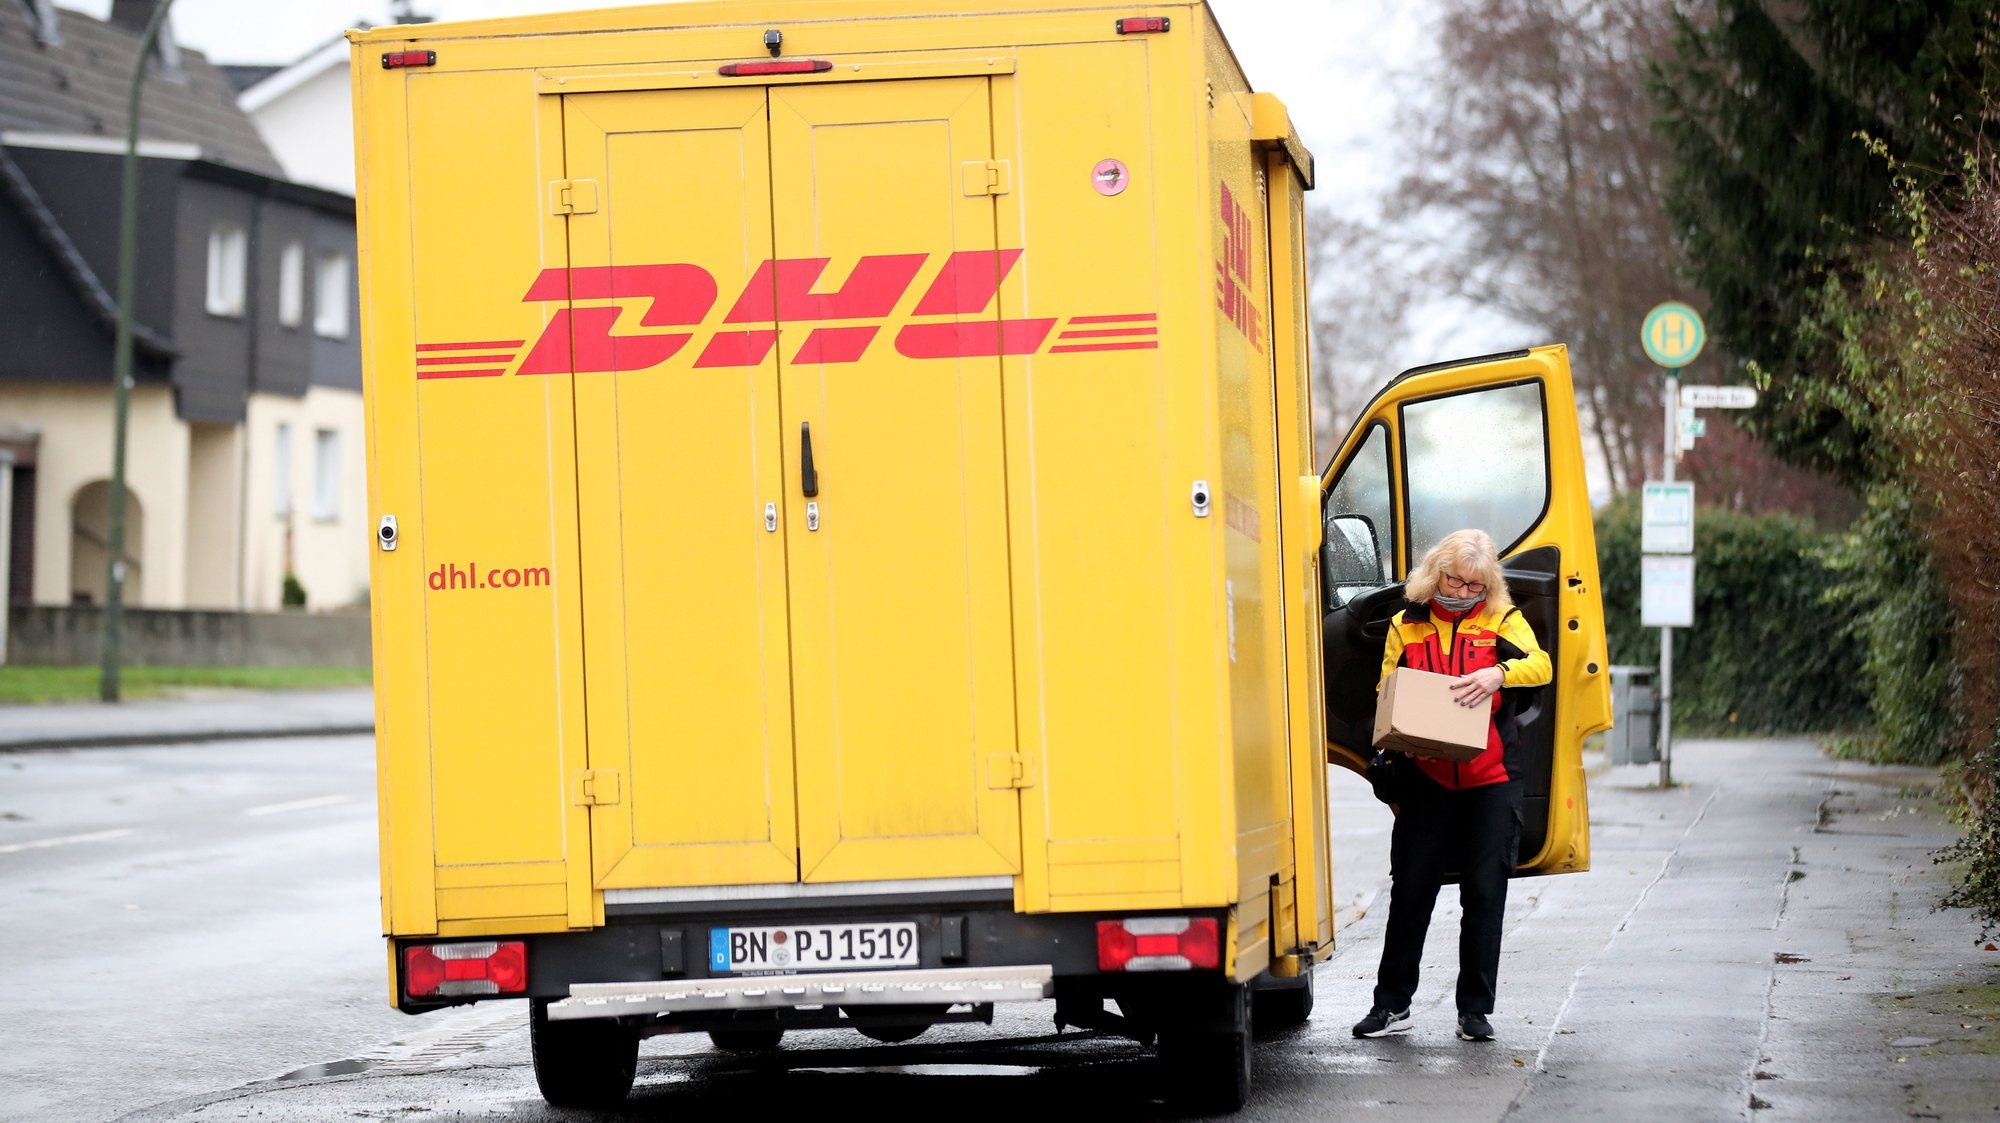 epa08885604 A parcel carrier of the Deutsche Post DHL Group logistics and postal services company delivers parcels in a residential area in Dortmund, Germany, 15 December 2020. According to a company spokesman, Deutsche Post DHL Group expects to break the record of 11 million parcel shipments per day several times in the run-up to Christmas.  EPA/FRIEDEMANN VOGEL